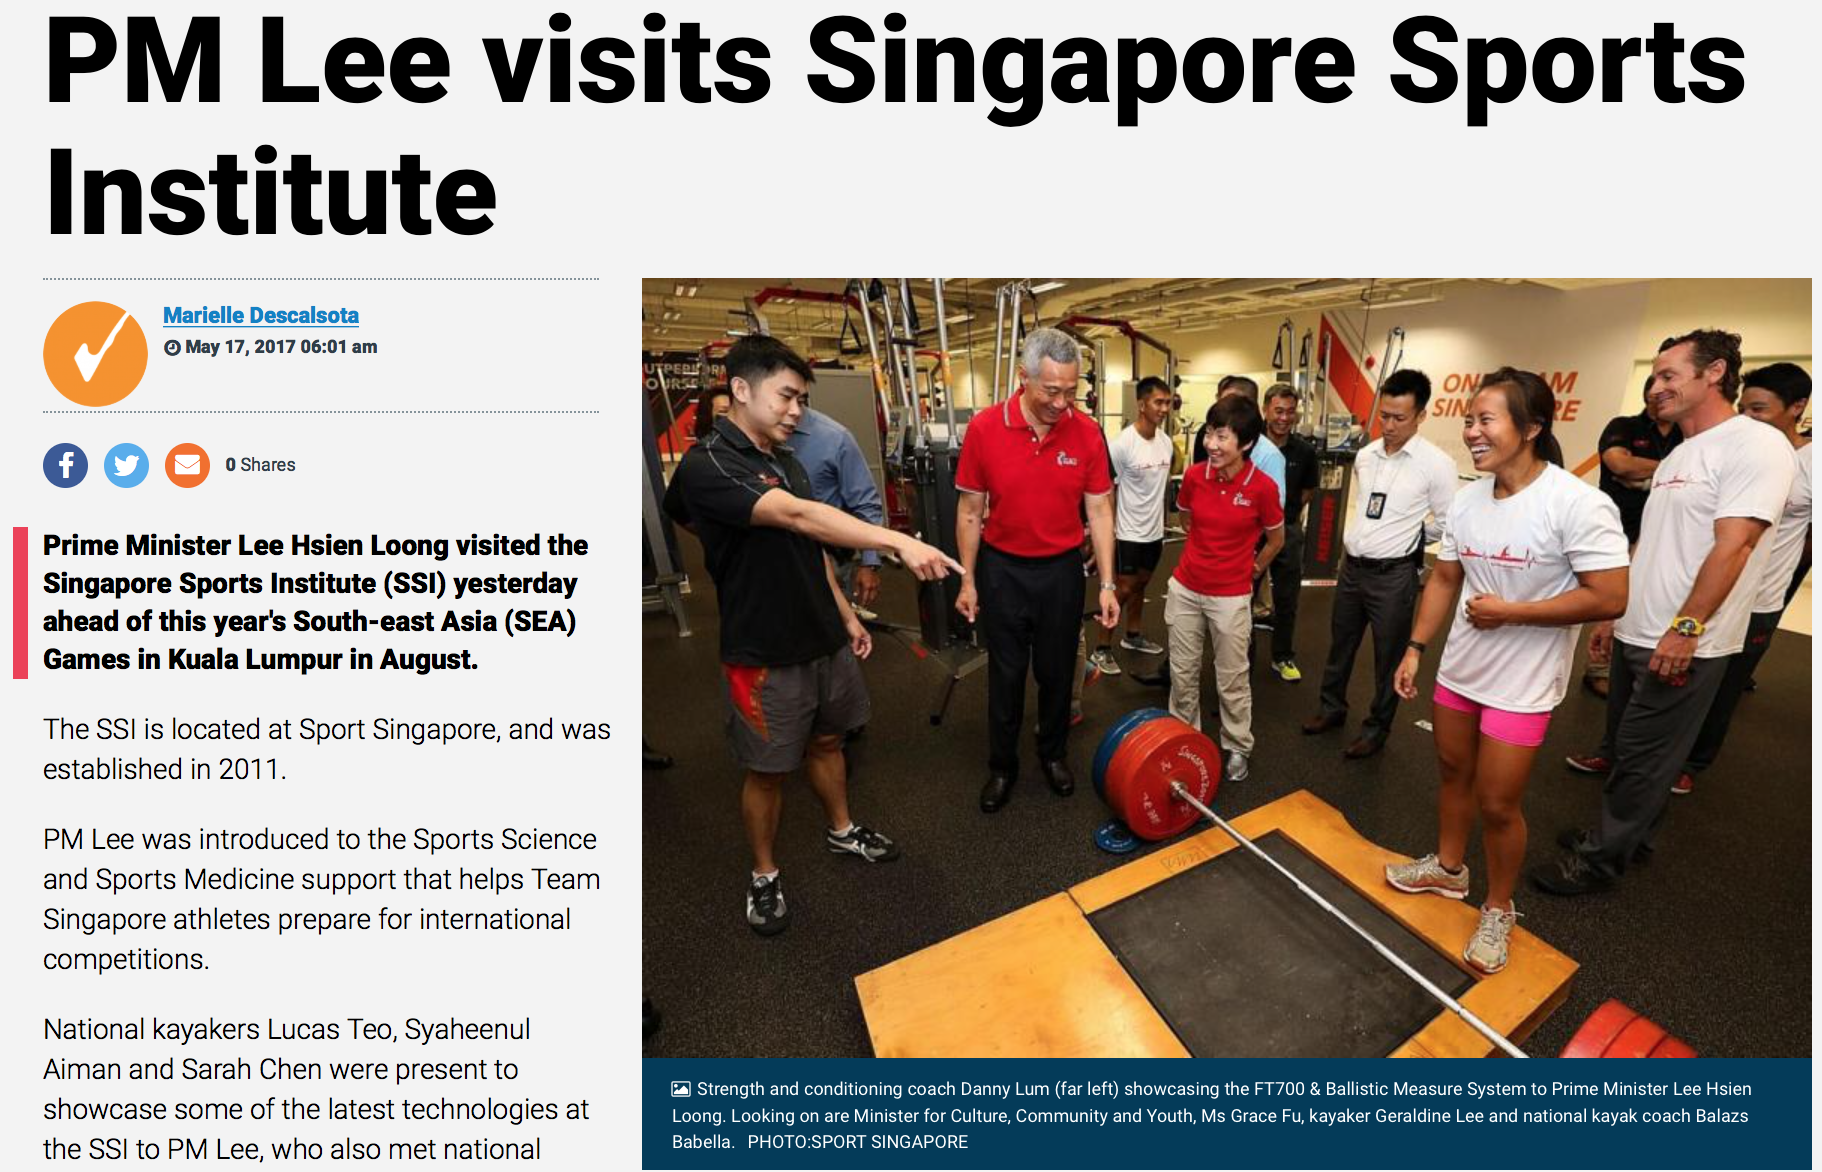  Singapore Primer Minister visit to Singapore Sports Institute for Reuters for Sport Singapore 